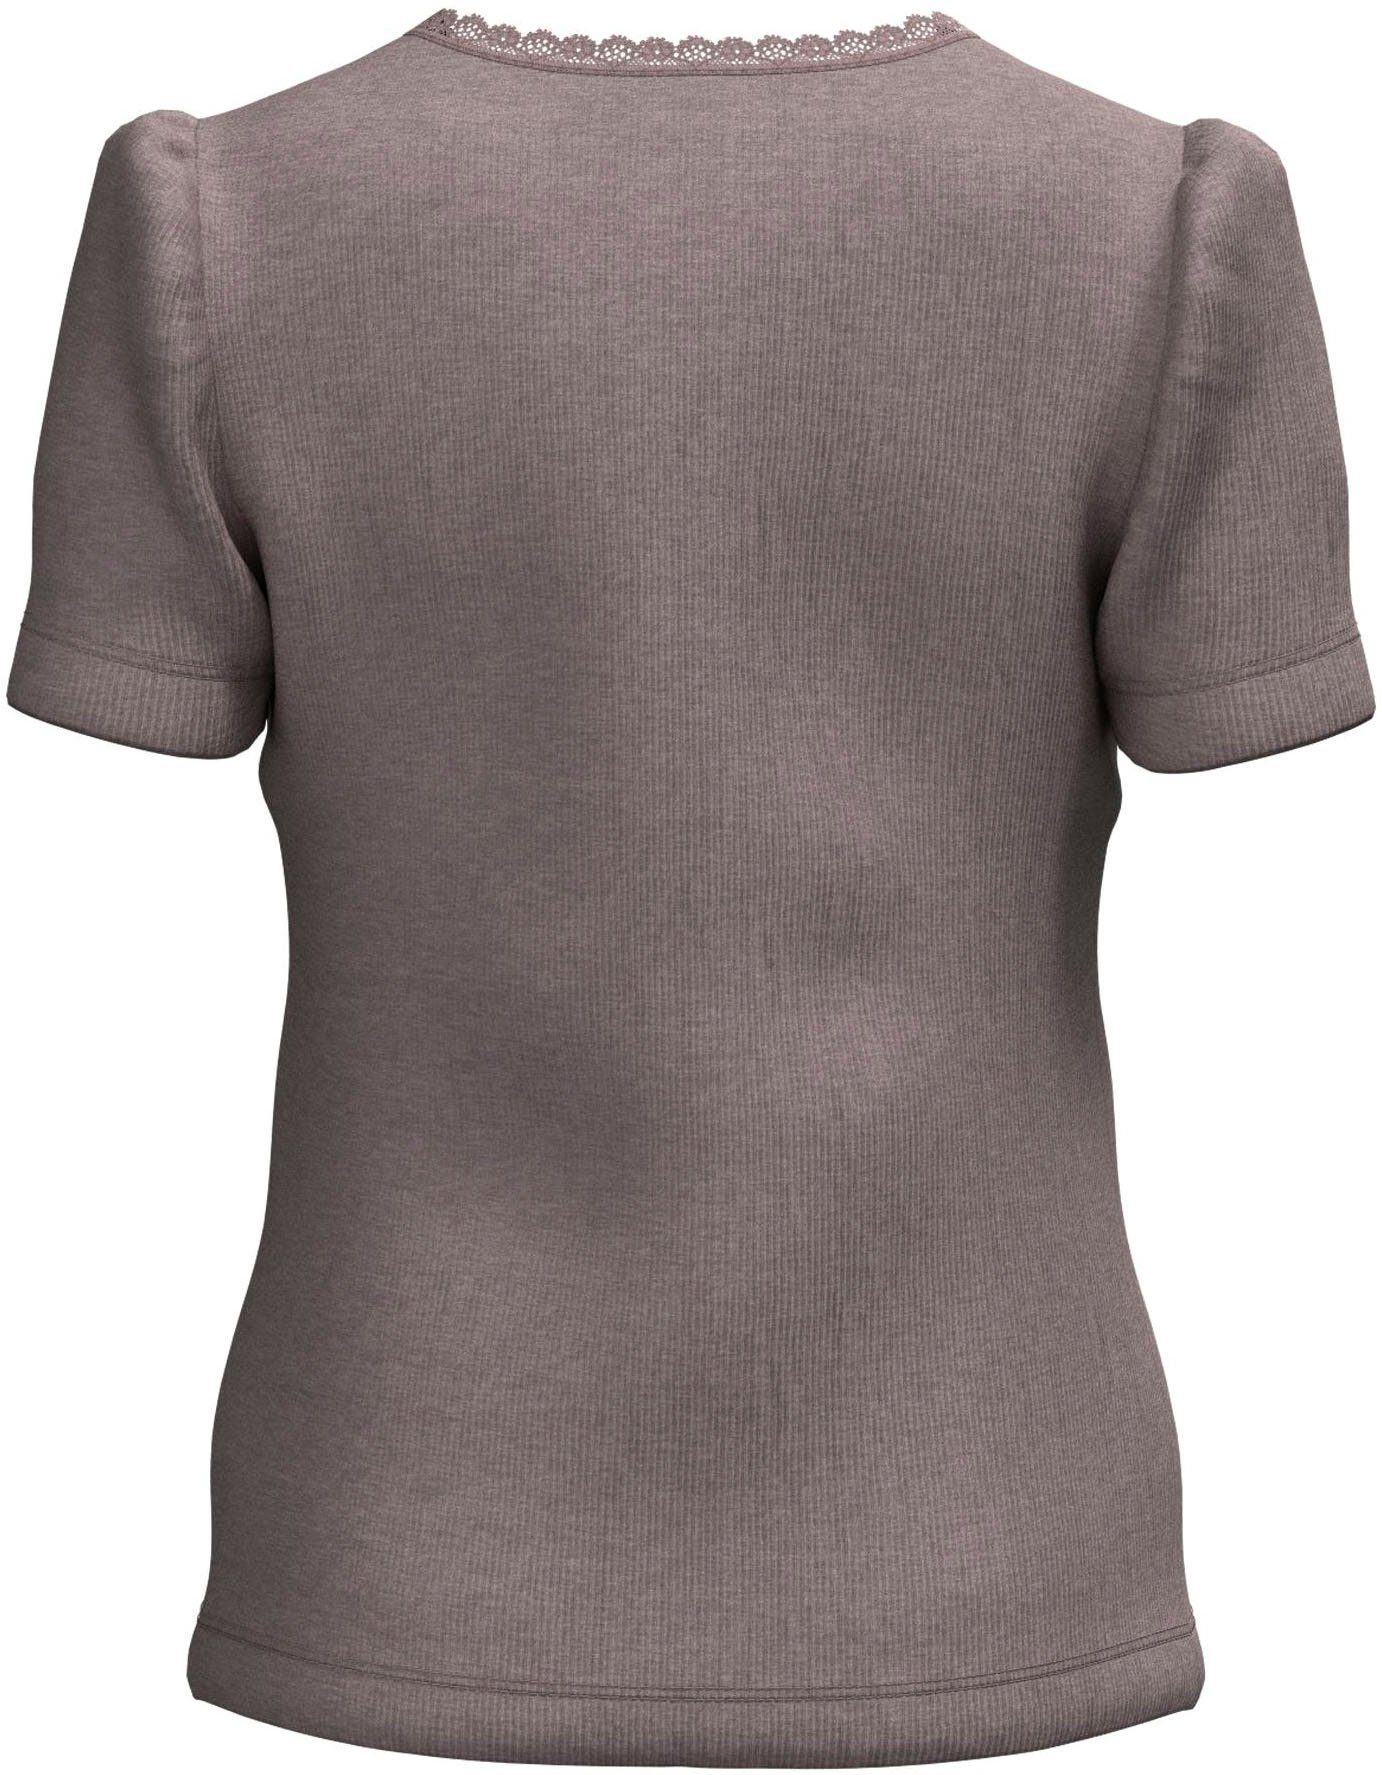 Shirttop SS It NOOS TOP Name NMFKAB deauville mauve